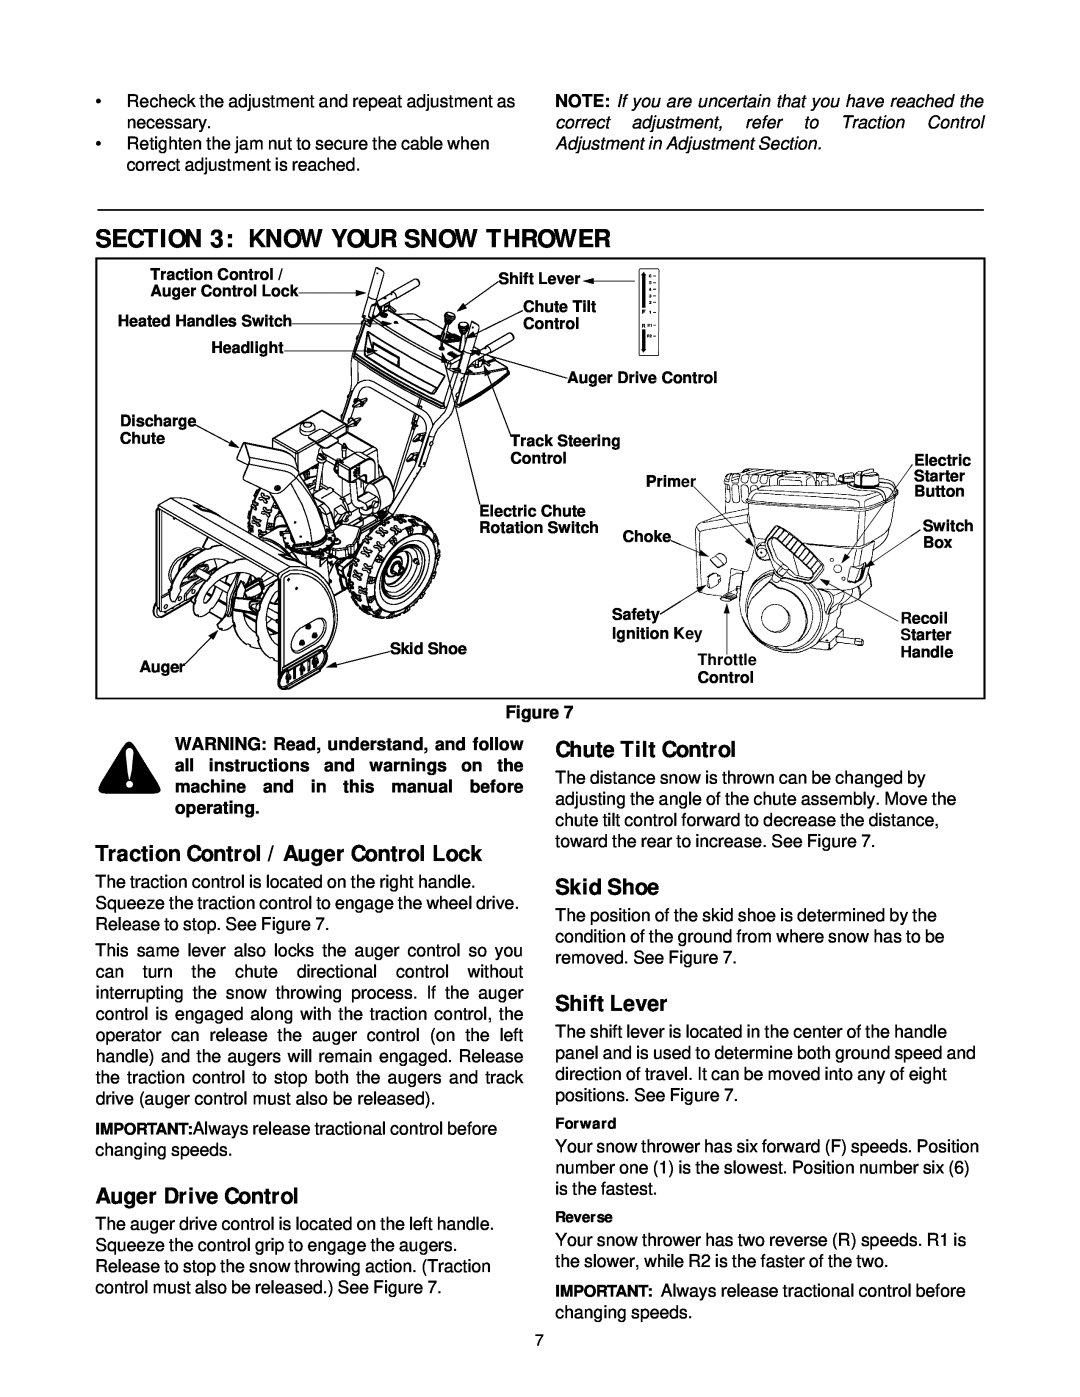 Cub Cadet 850 SWE manual Know Your Snow Thrower, Chute Tilt Control, Auger Drive Control, Skid Shoe, Shift Lever, Forward 